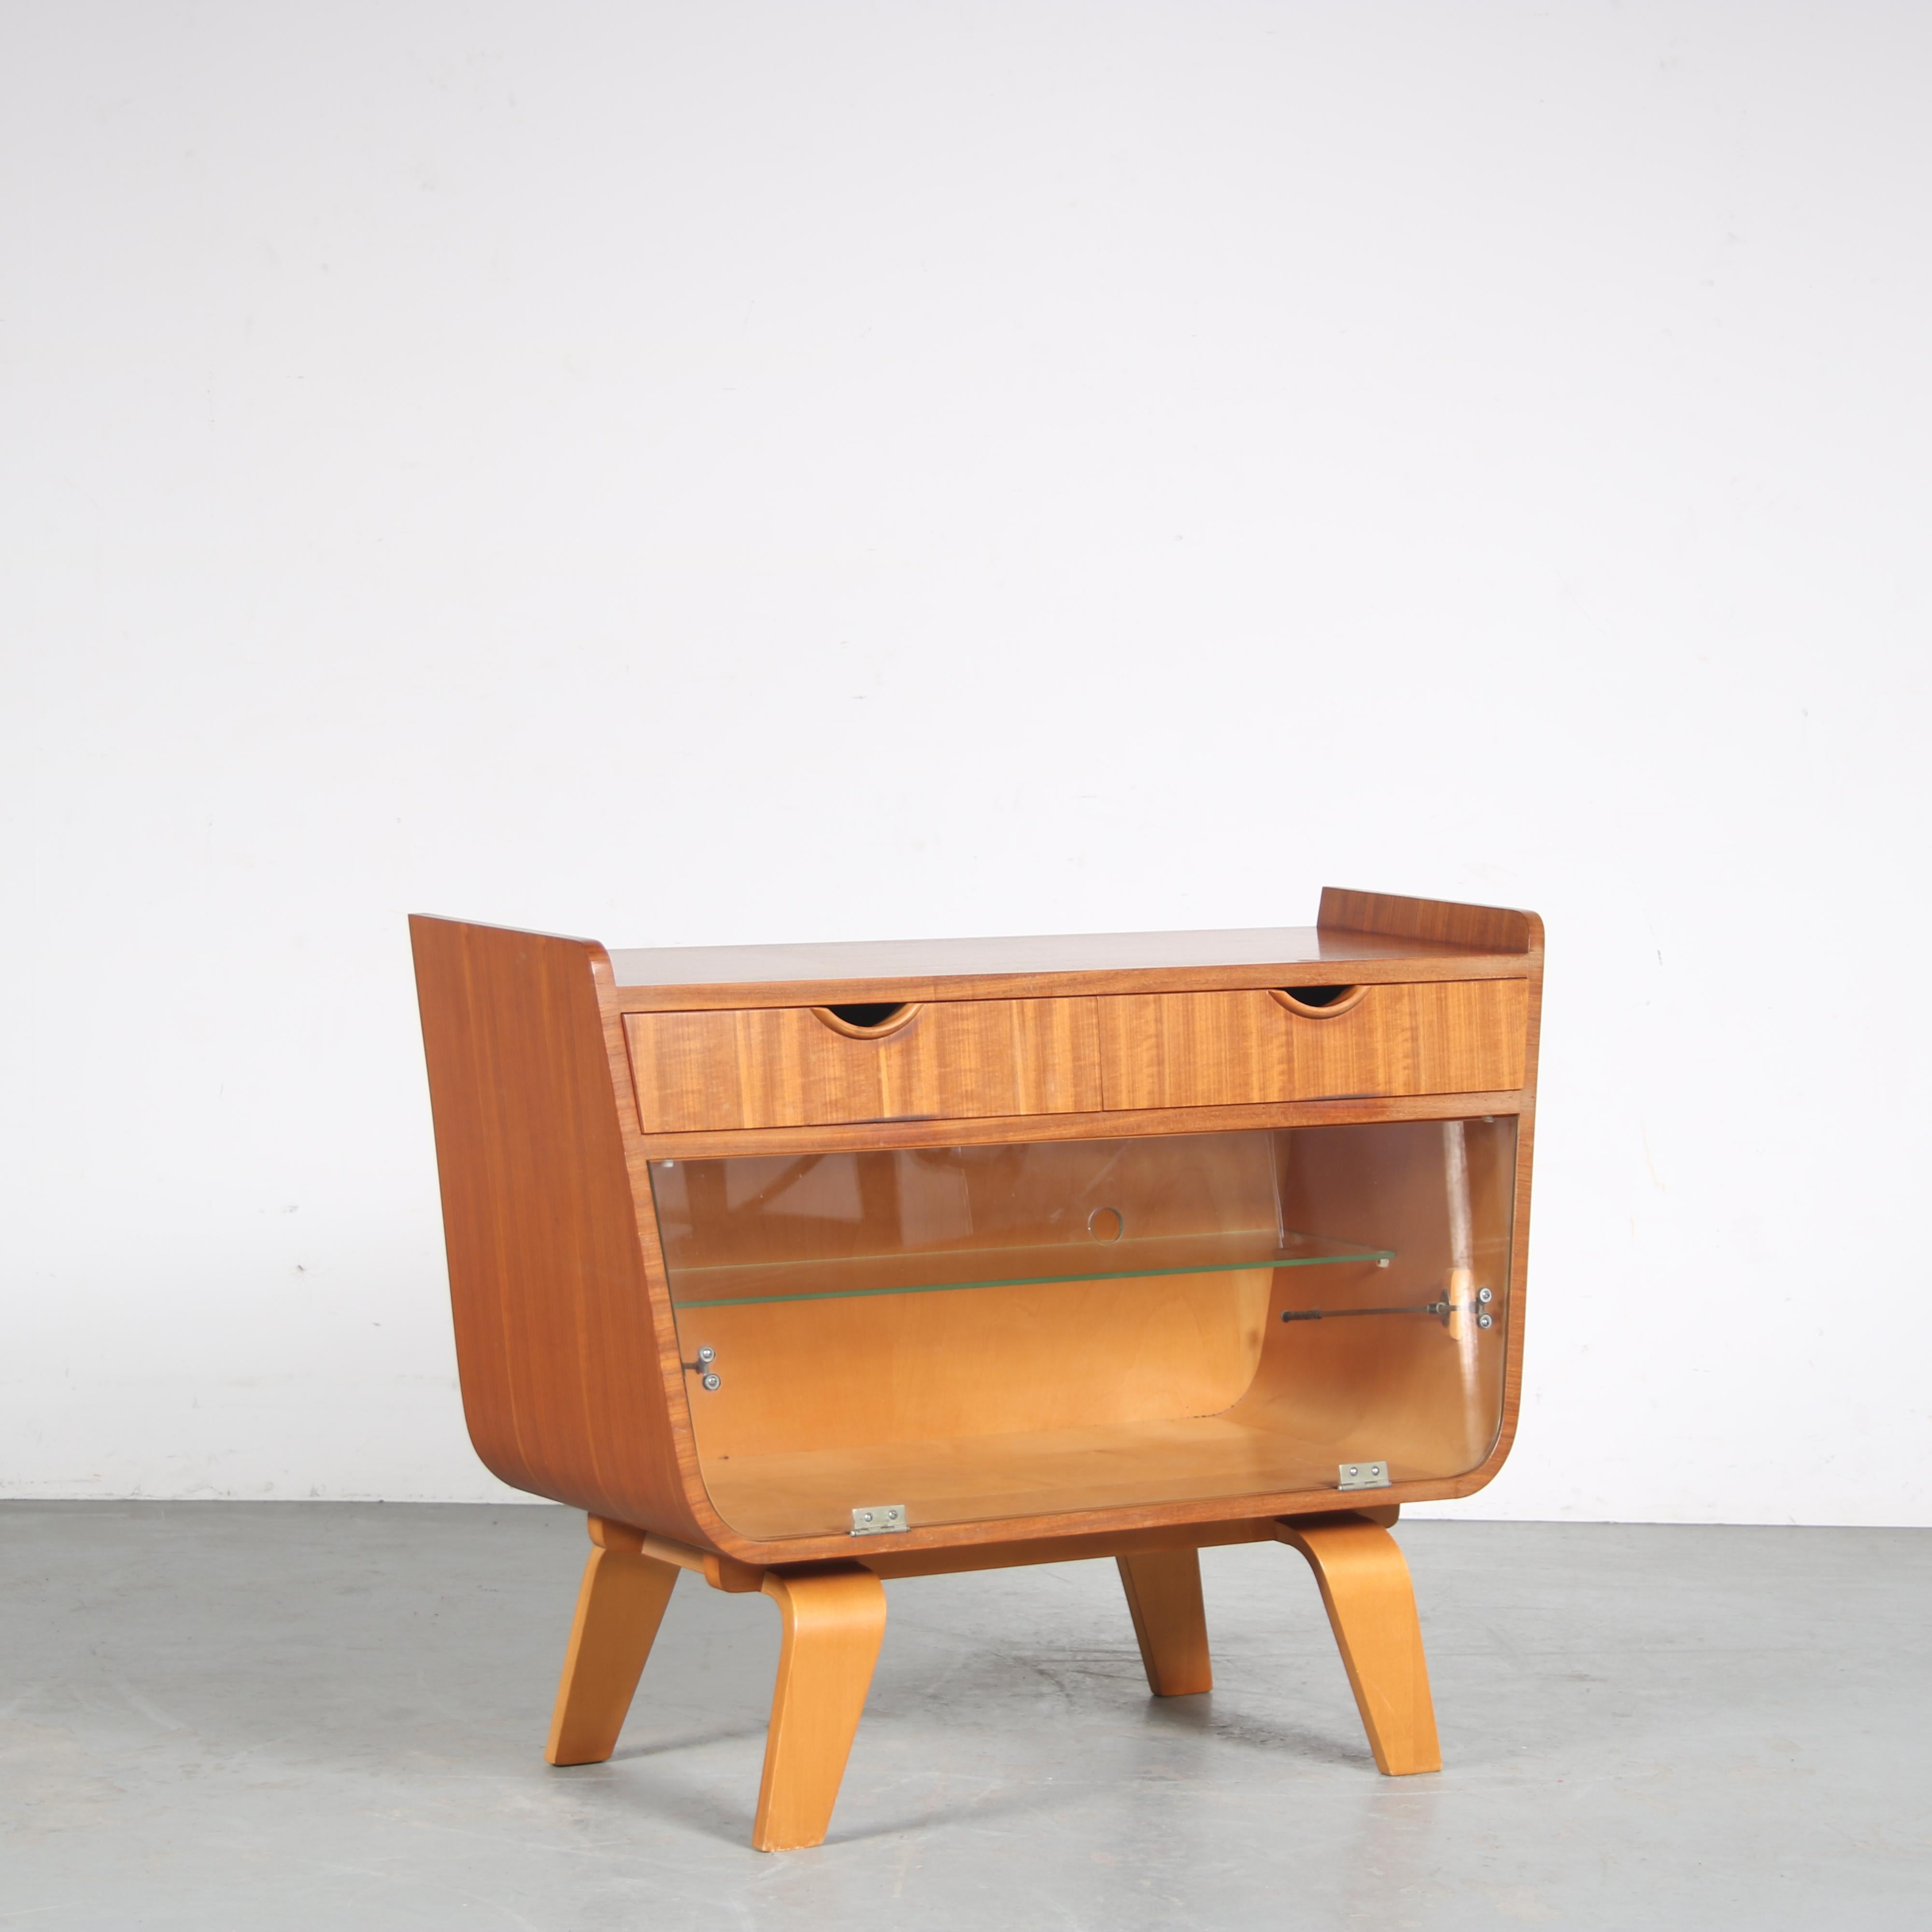 A lovely small bar cabinet designed by Cor Alons and manufactured by De Boer Gouda in the Netherlands around 1950.

It is made of high quality birch wood and plywood with a glass drop down door. The rounded finish and curved legs are recognizable